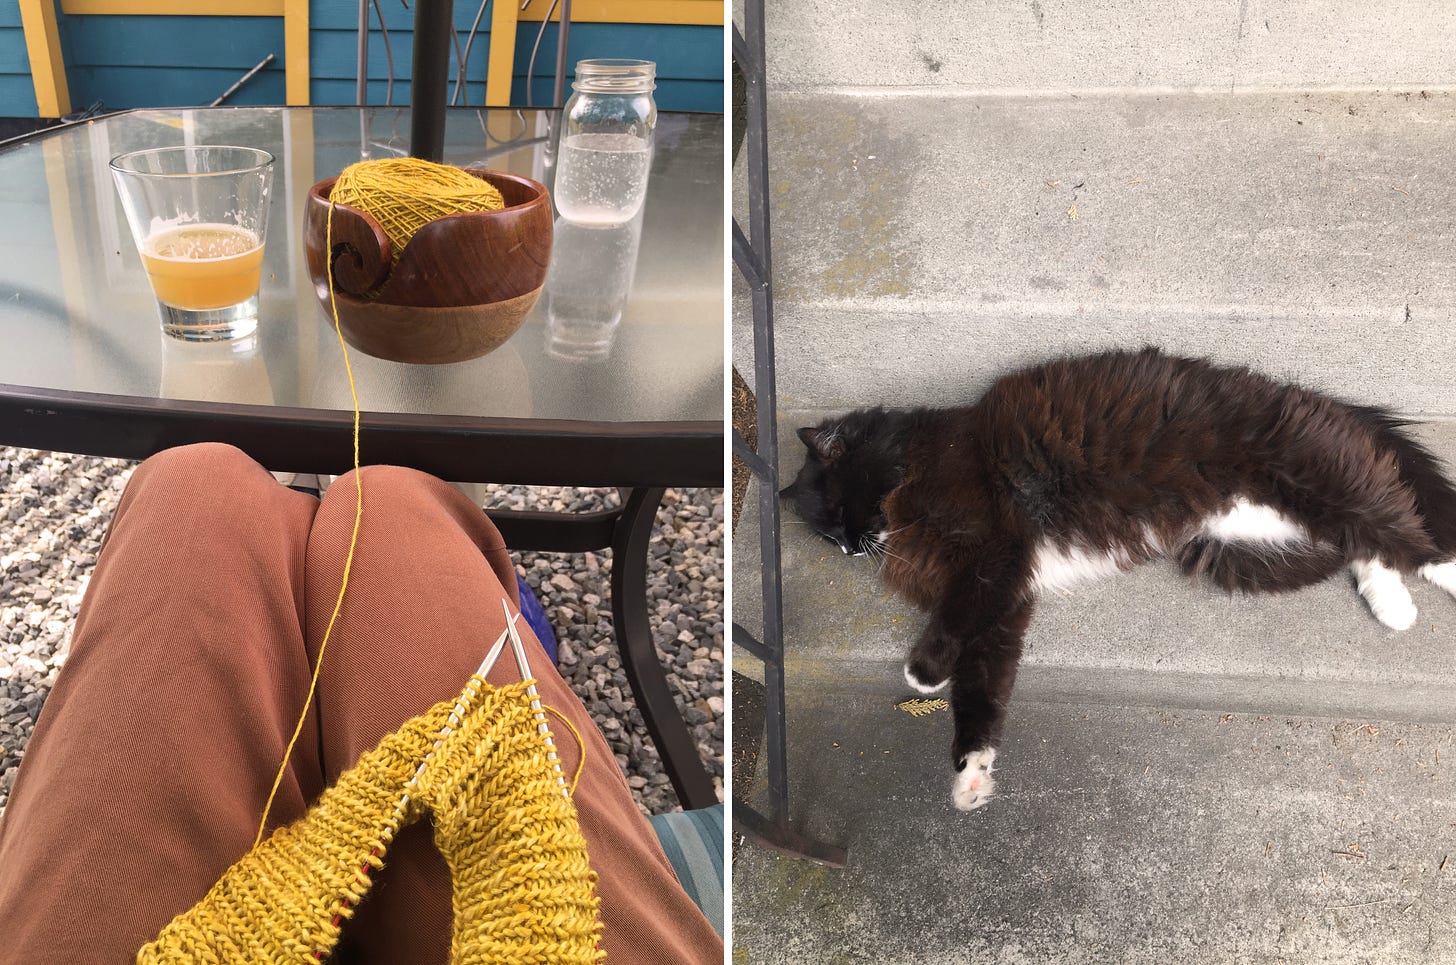 Left image: in the foreground, mustard-yellow knitting rests on my legs. I am wearing light brown pants. Behind them on a patio table is a half-full glass of beer, a glass of water, and a ball of yarn in a two-toned wooden yarn bowl. Right image: on a set of cement stairs, a fluffy black and white cat is stretched out with his eyes closed.